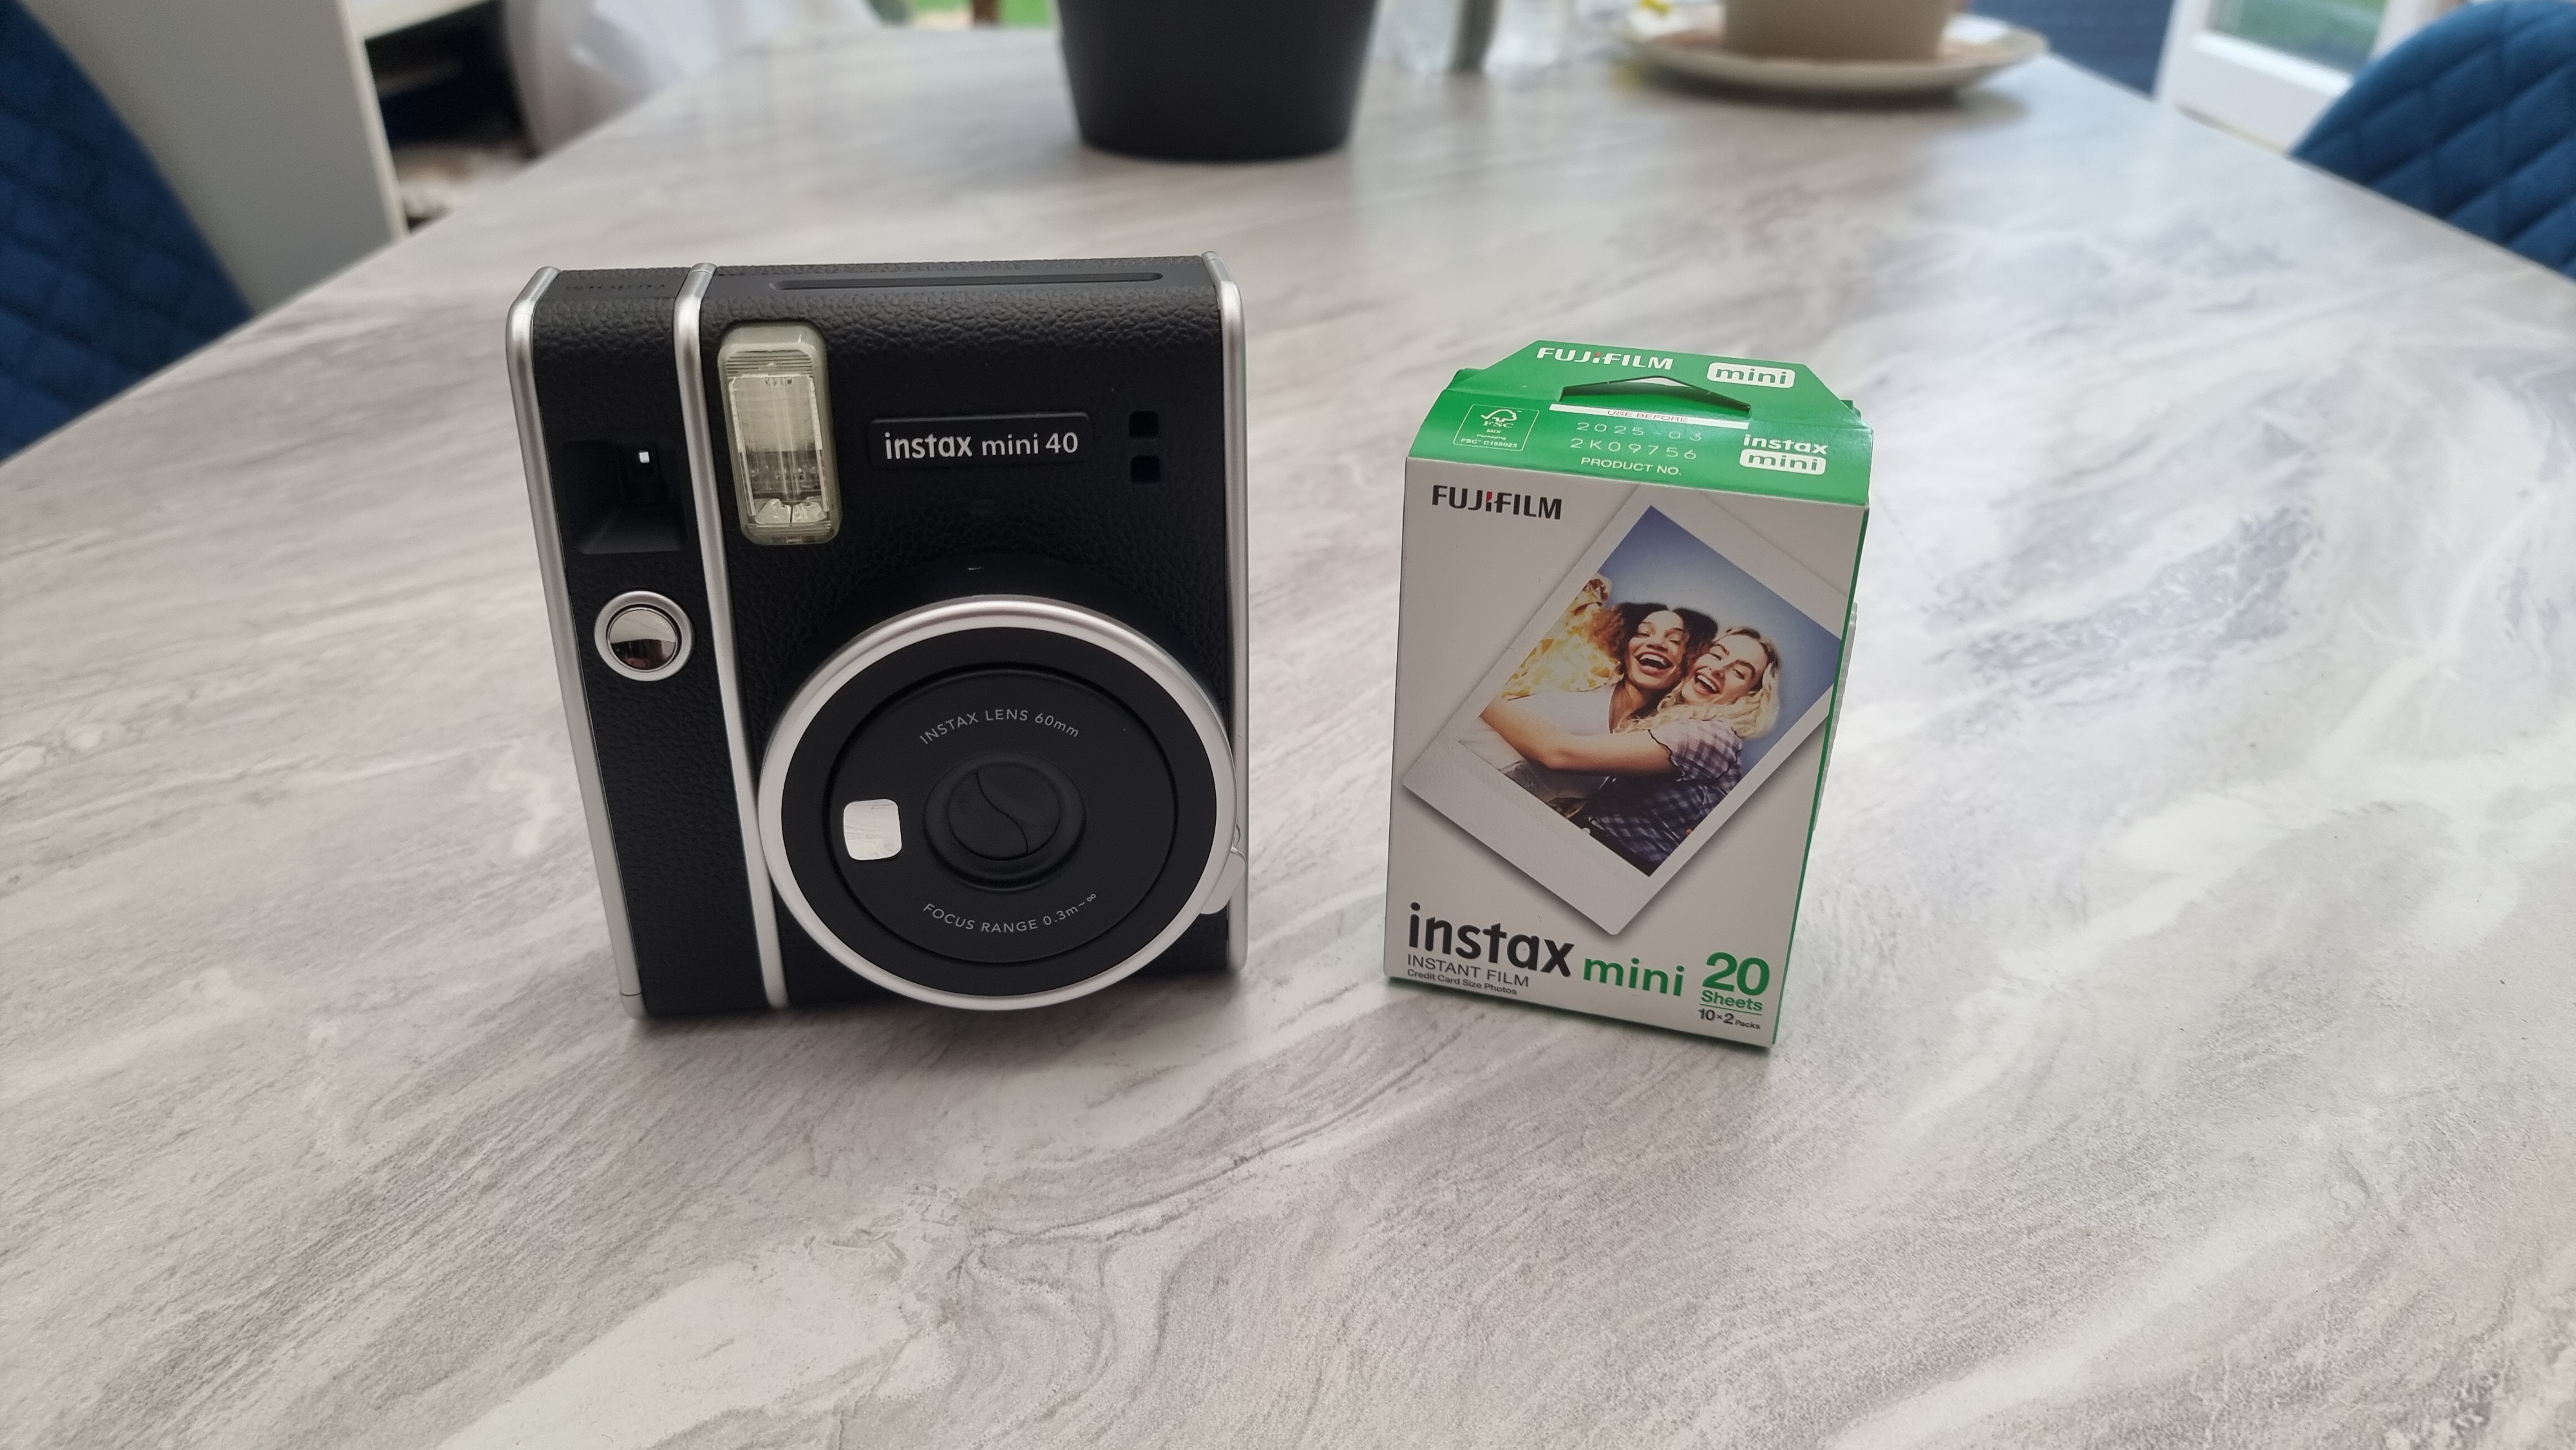 A Fujifilm Instax Mini 40 camera and film pack on a marble table